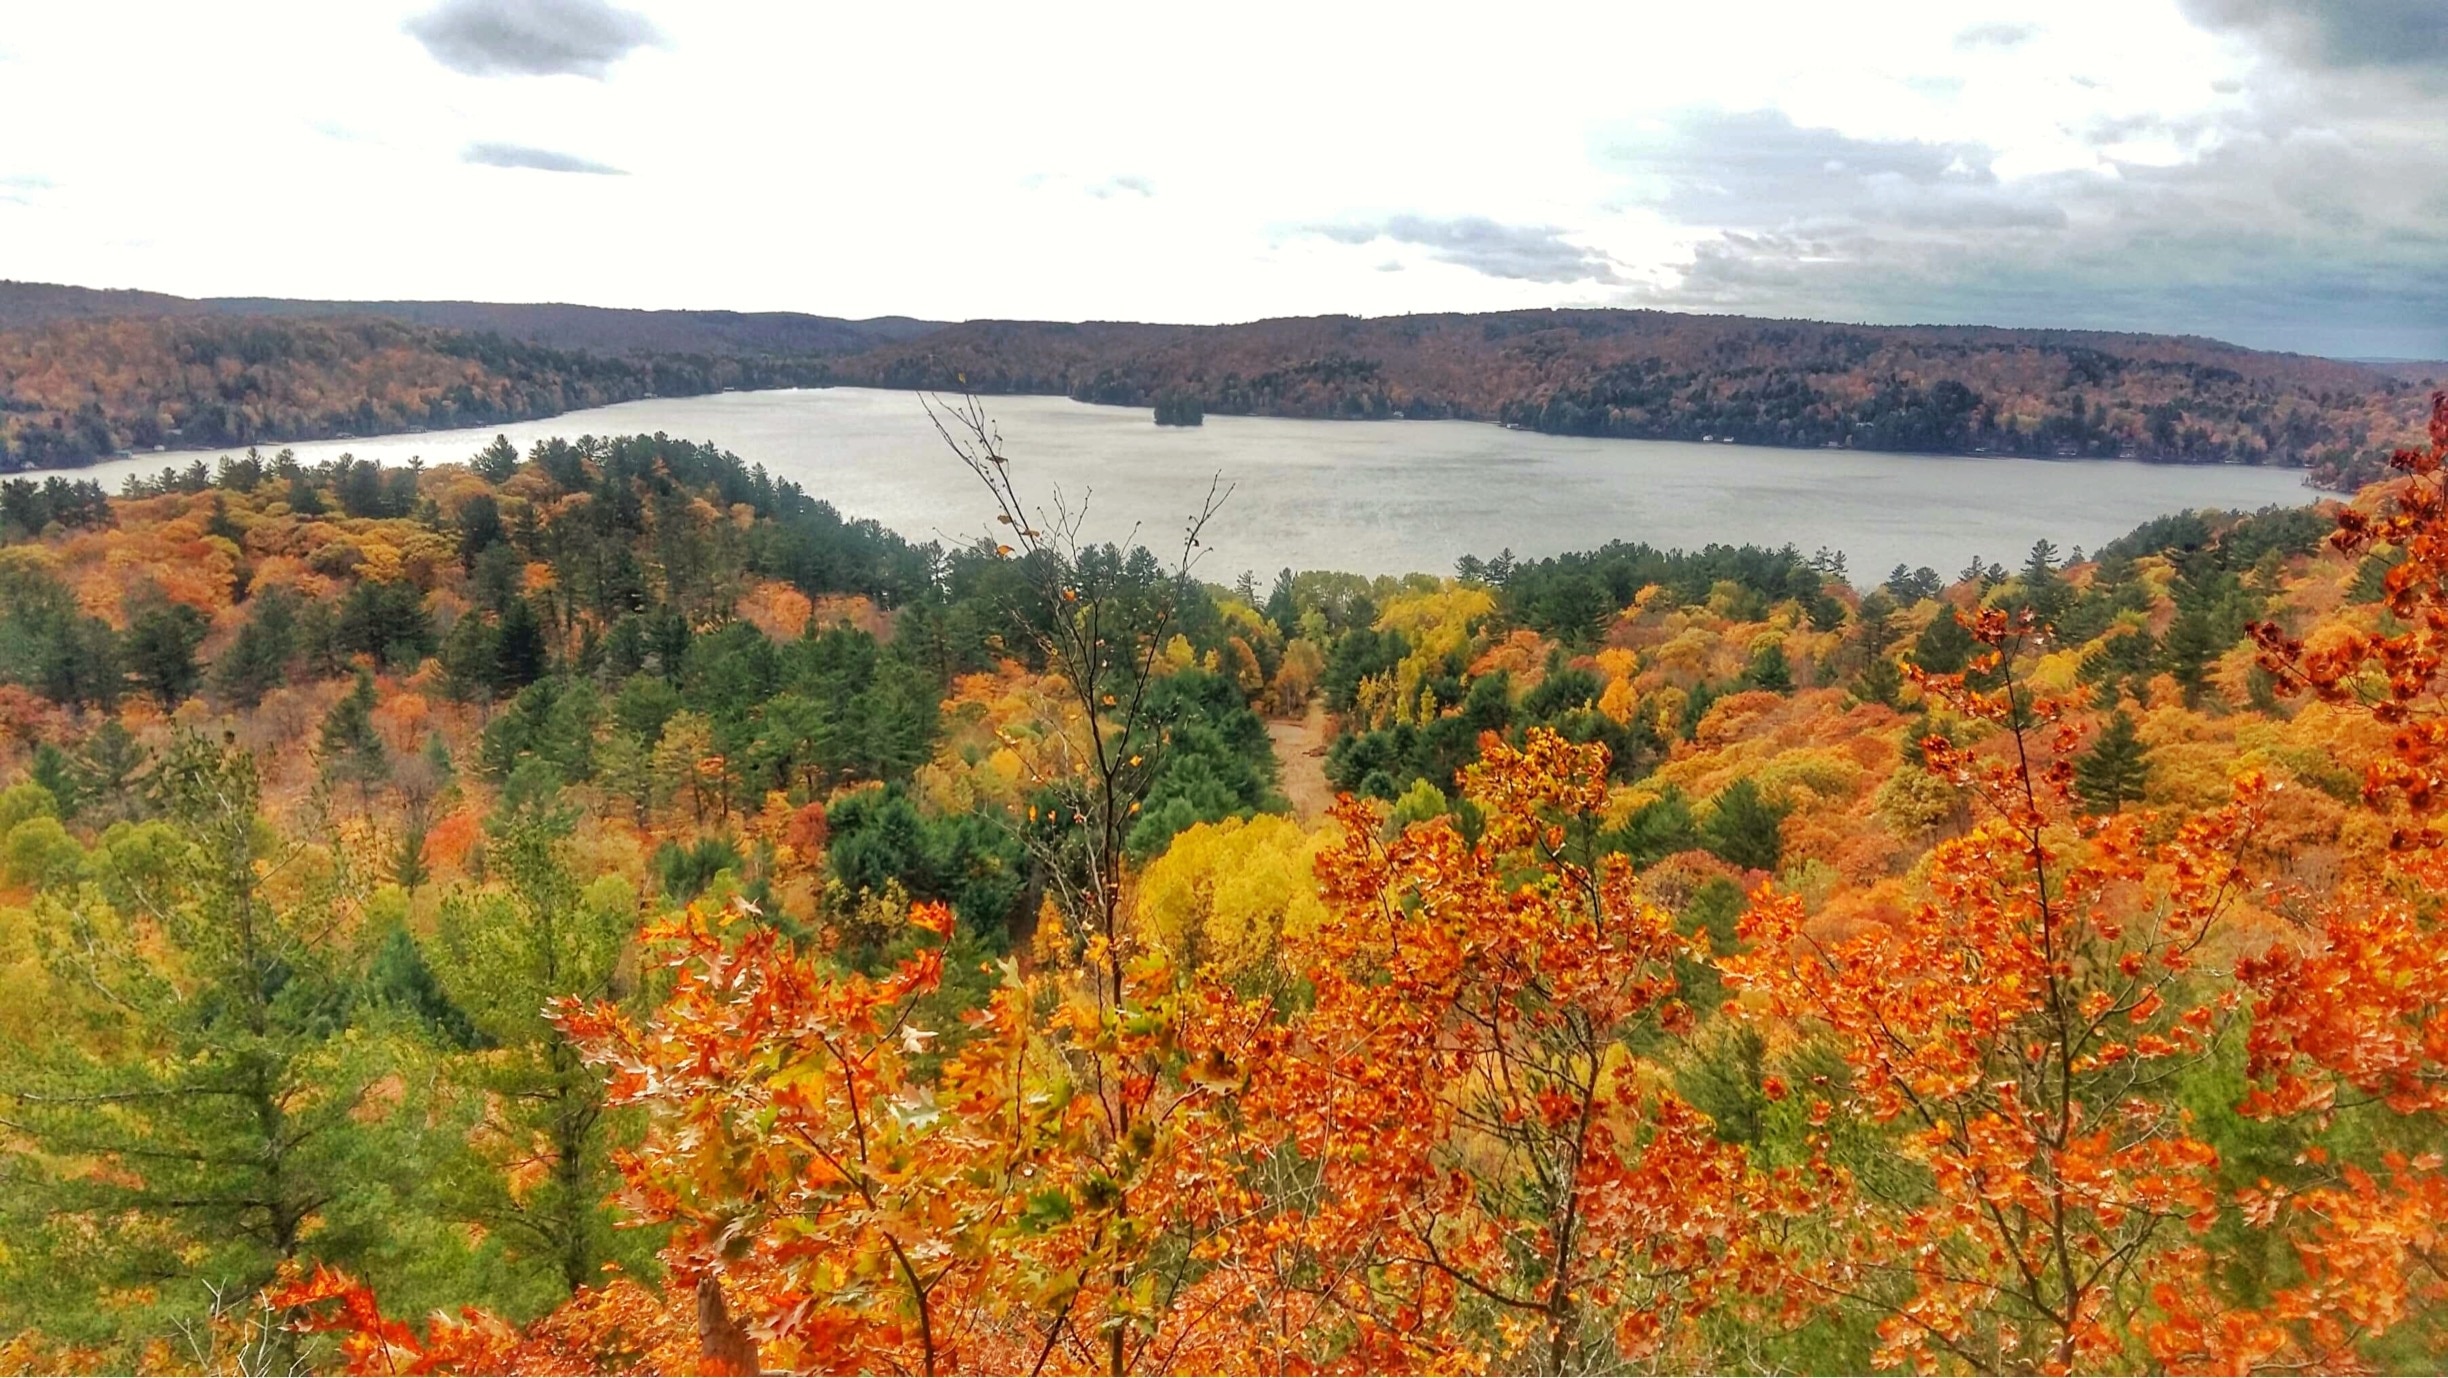 One of the best places in Ontario, Canada to view dazzling fall colours, gorgeous scenery and spectacular panoramic view of Lake of Bays.
#GreatOutdoors